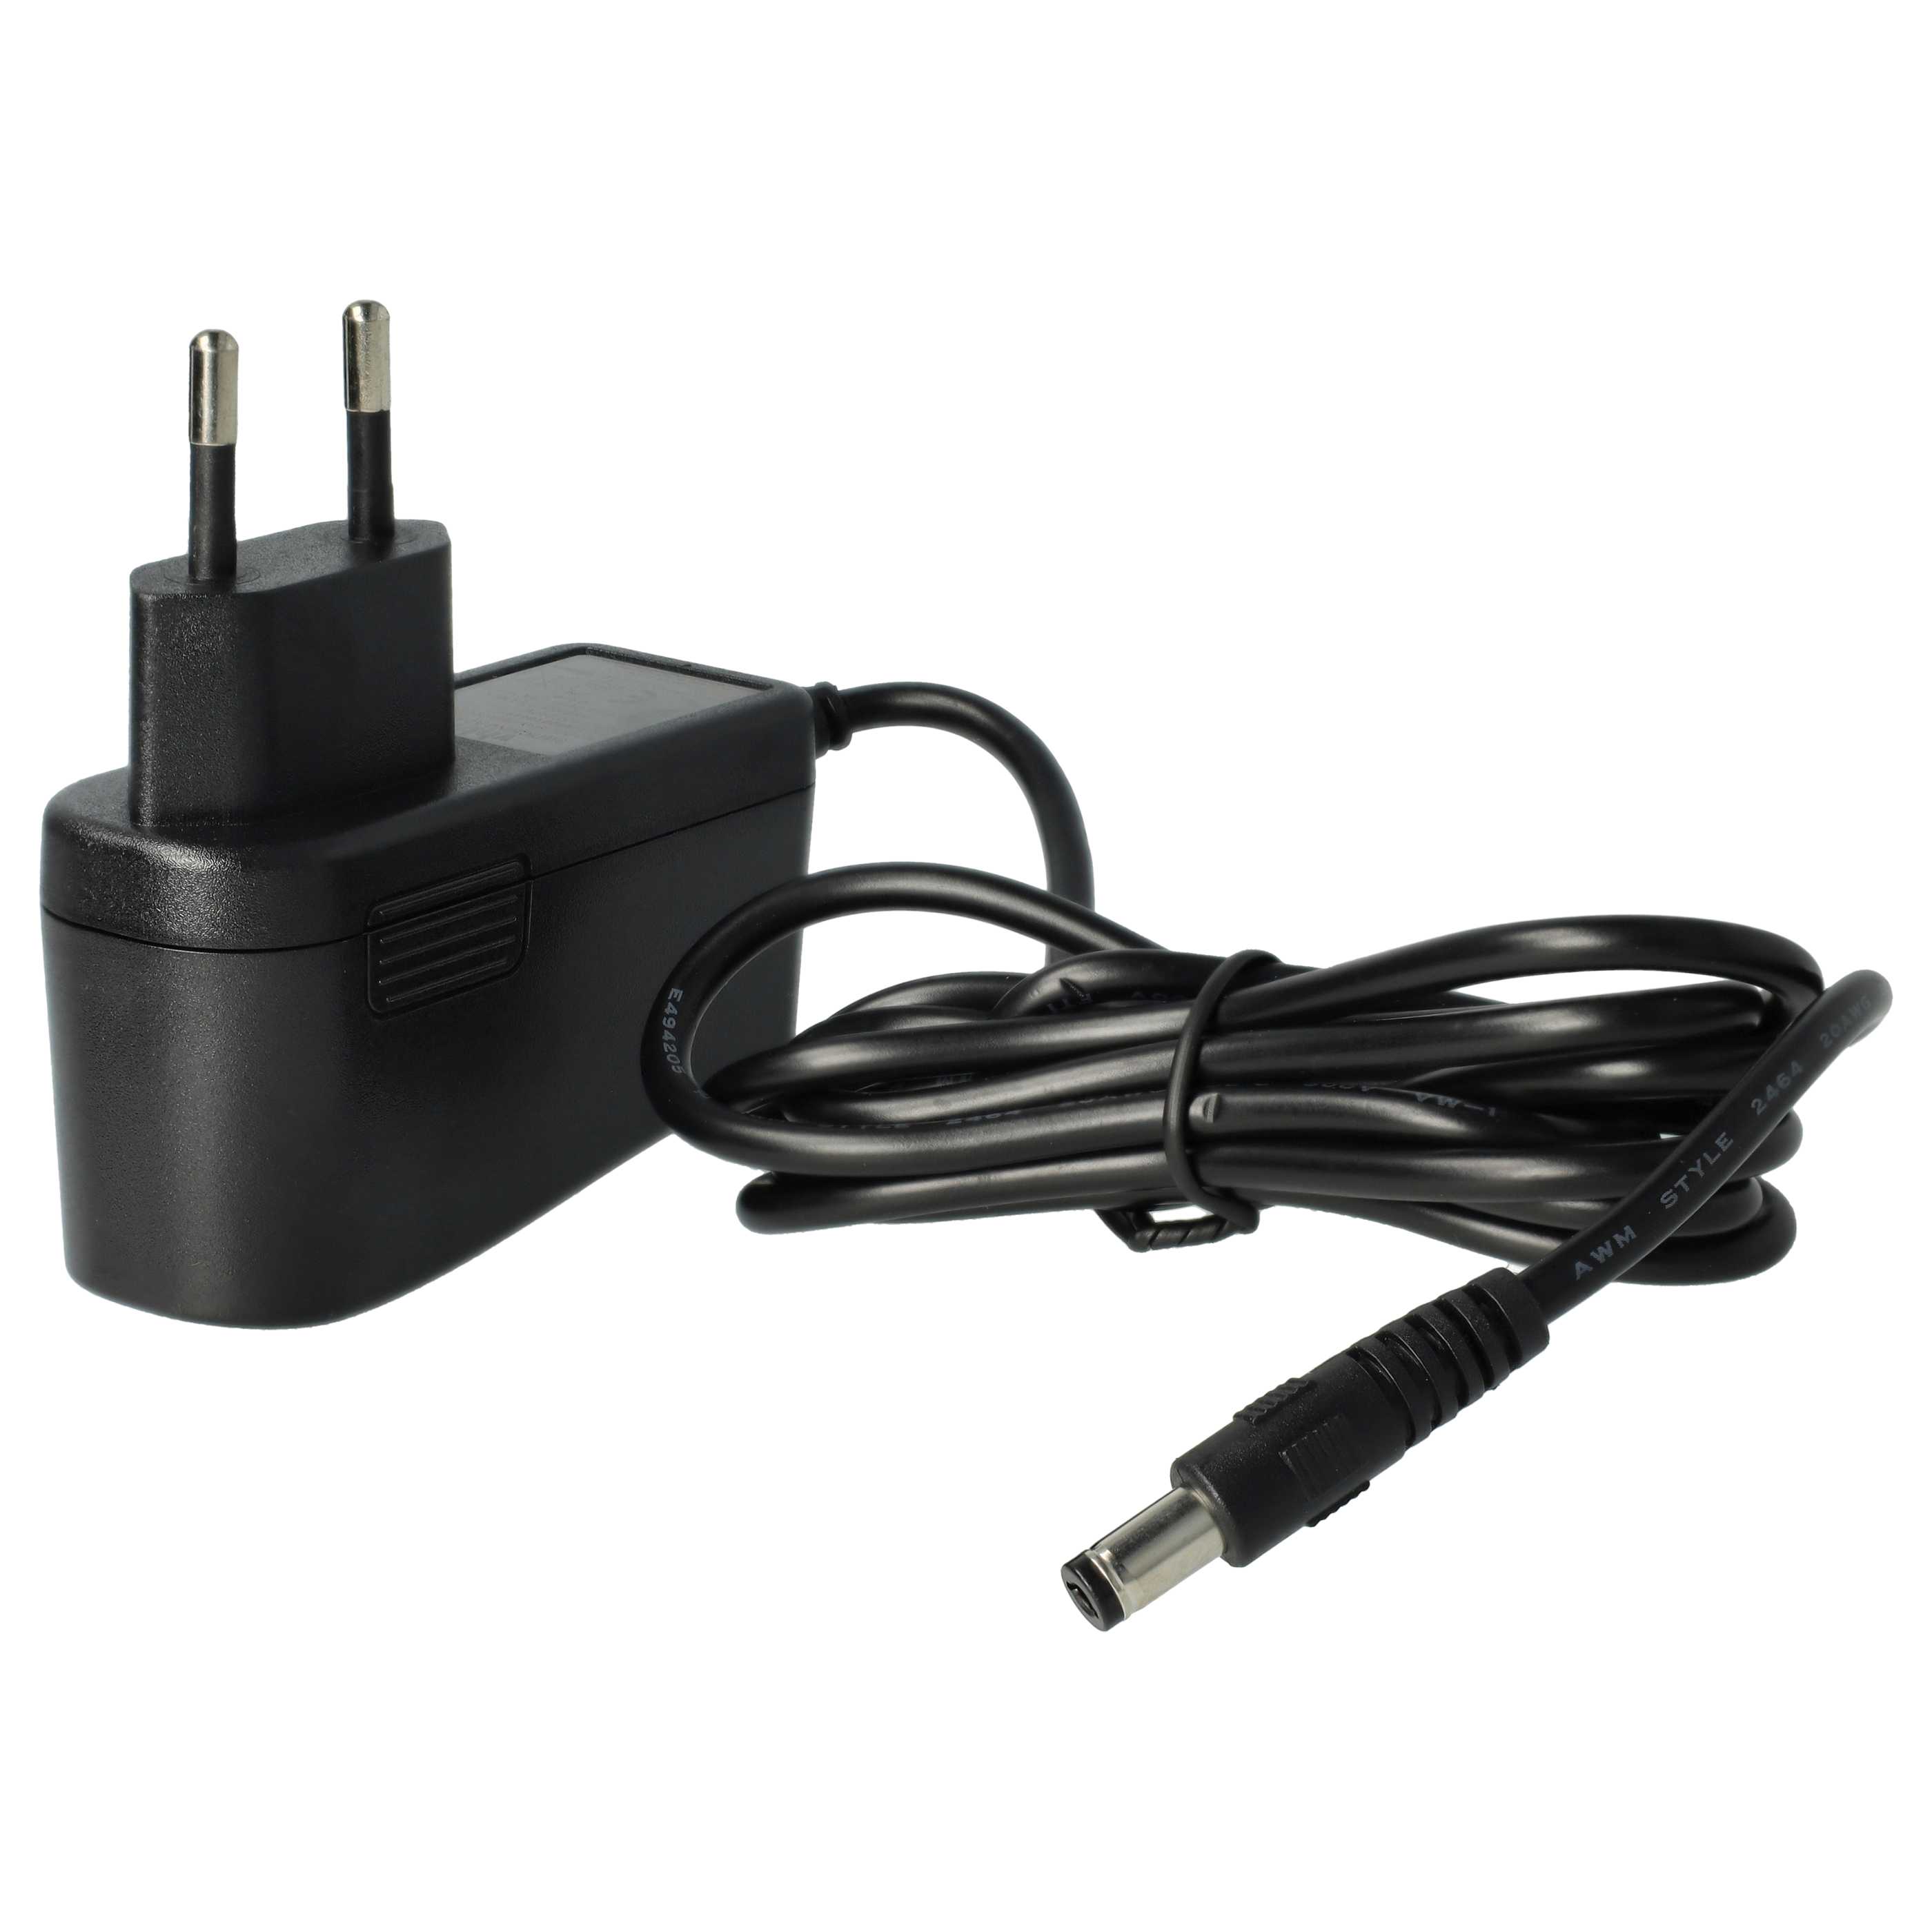 Mains Power Adapter replaces D-Link AF0605-E for D-Link router, hard drive, Modem etc. - 145 cm